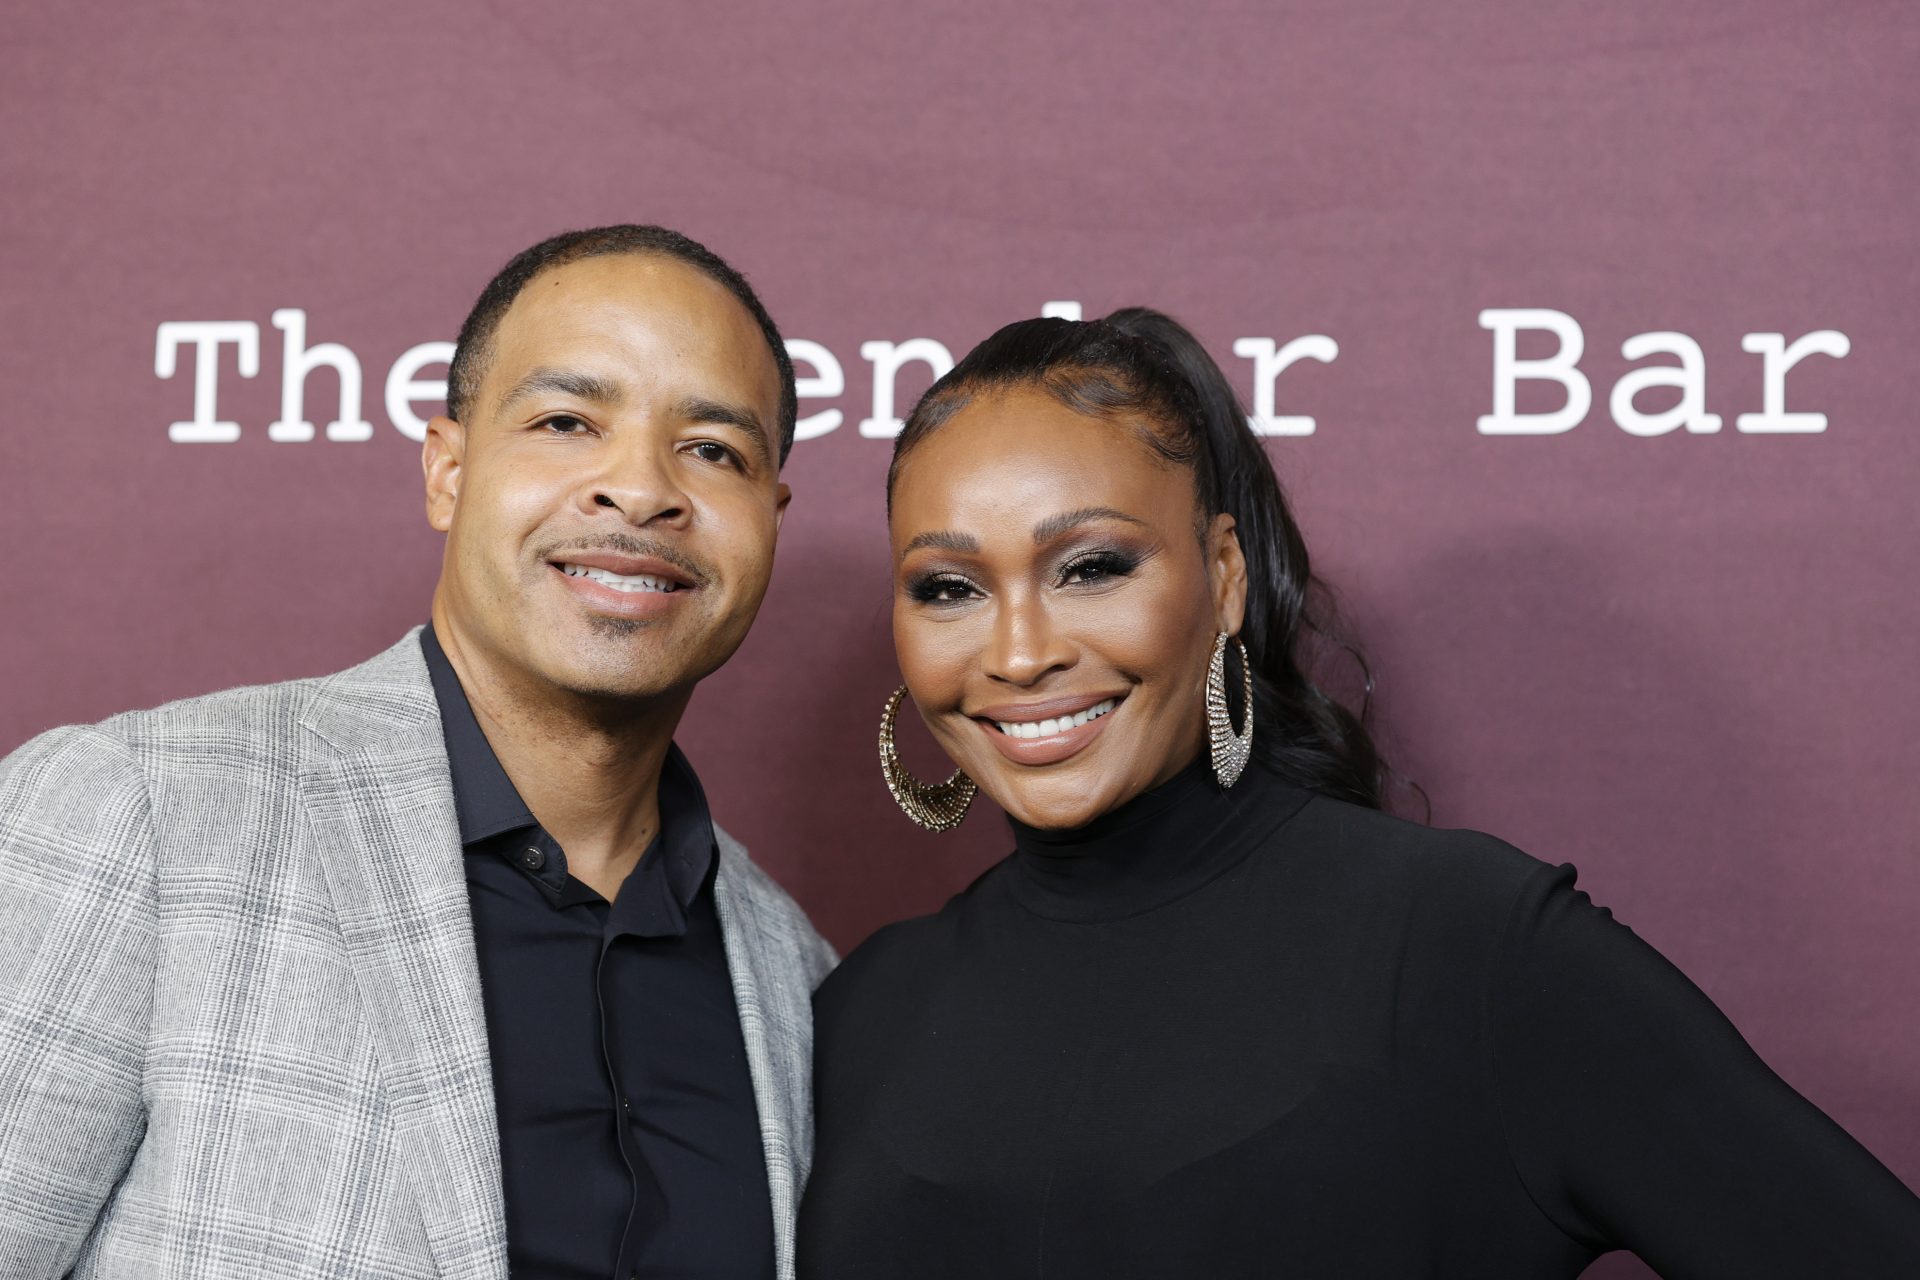 Cynthia Bailey Reveals "Final Straw" That Led To Filing For Divorce From Mike Hill